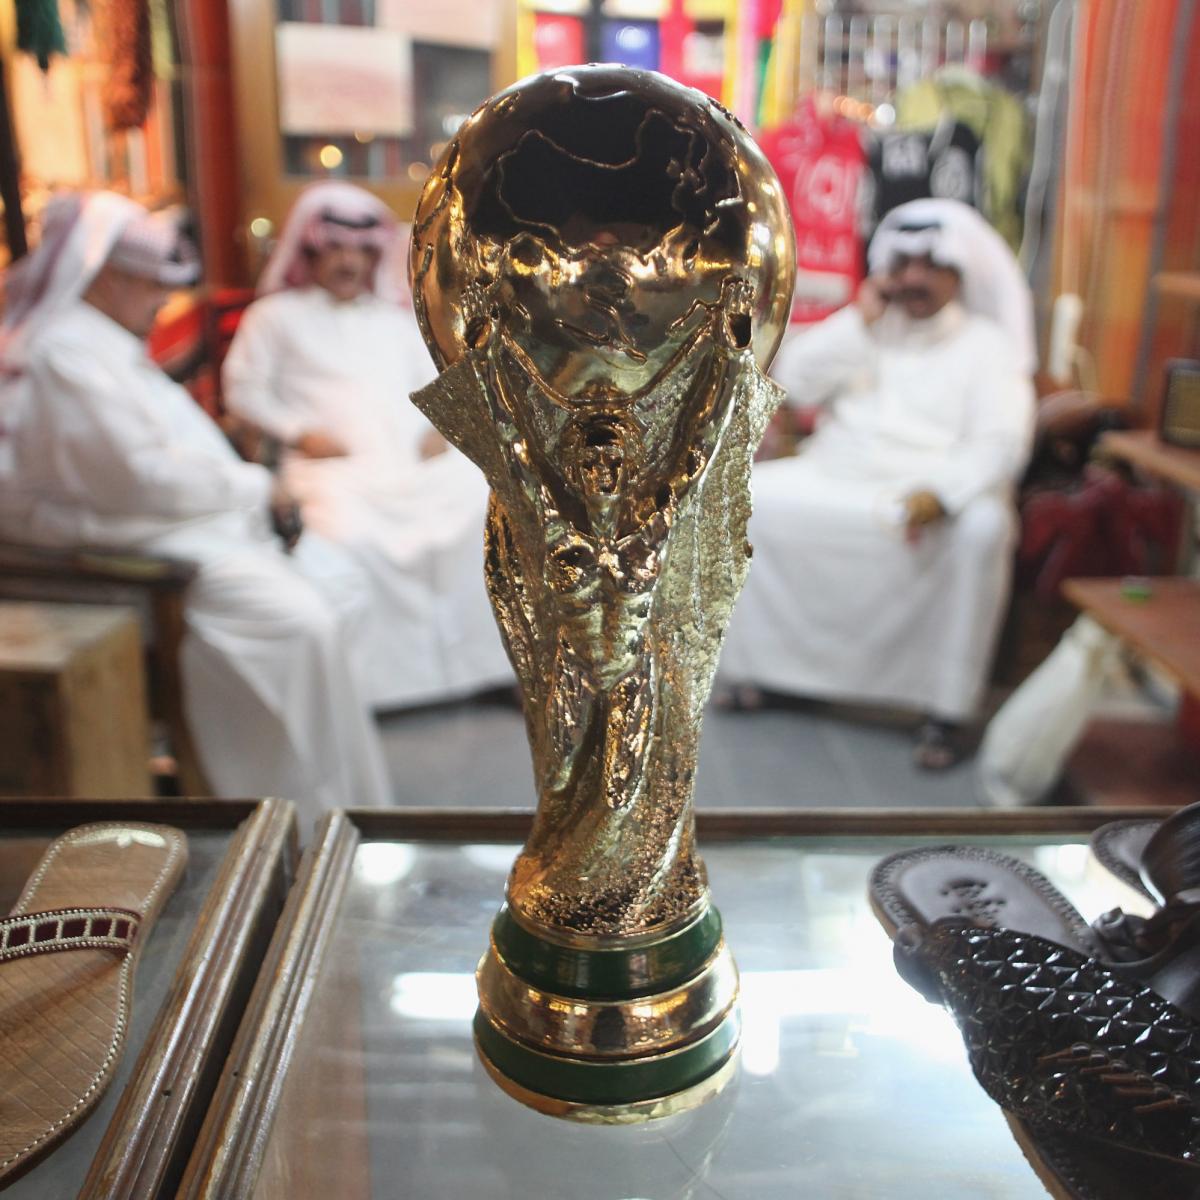 Qatar World Cup 2022: 5 Reasons to Believe It Will Be a Huge Success